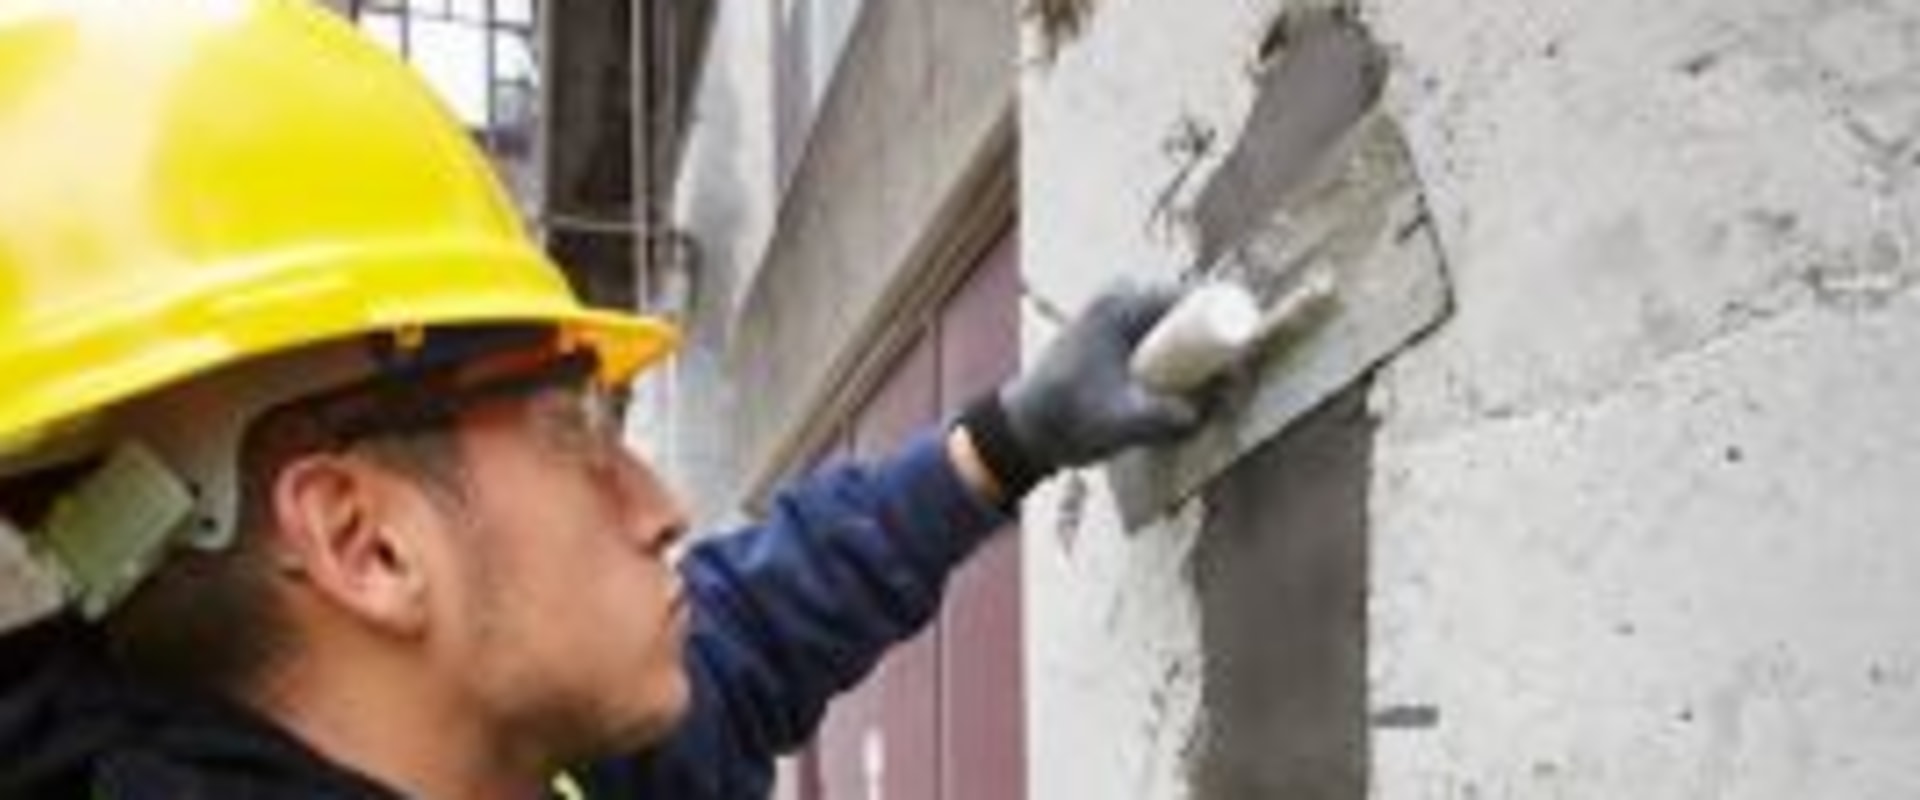 Everything You Need to Know About Concrete Repair Mortar